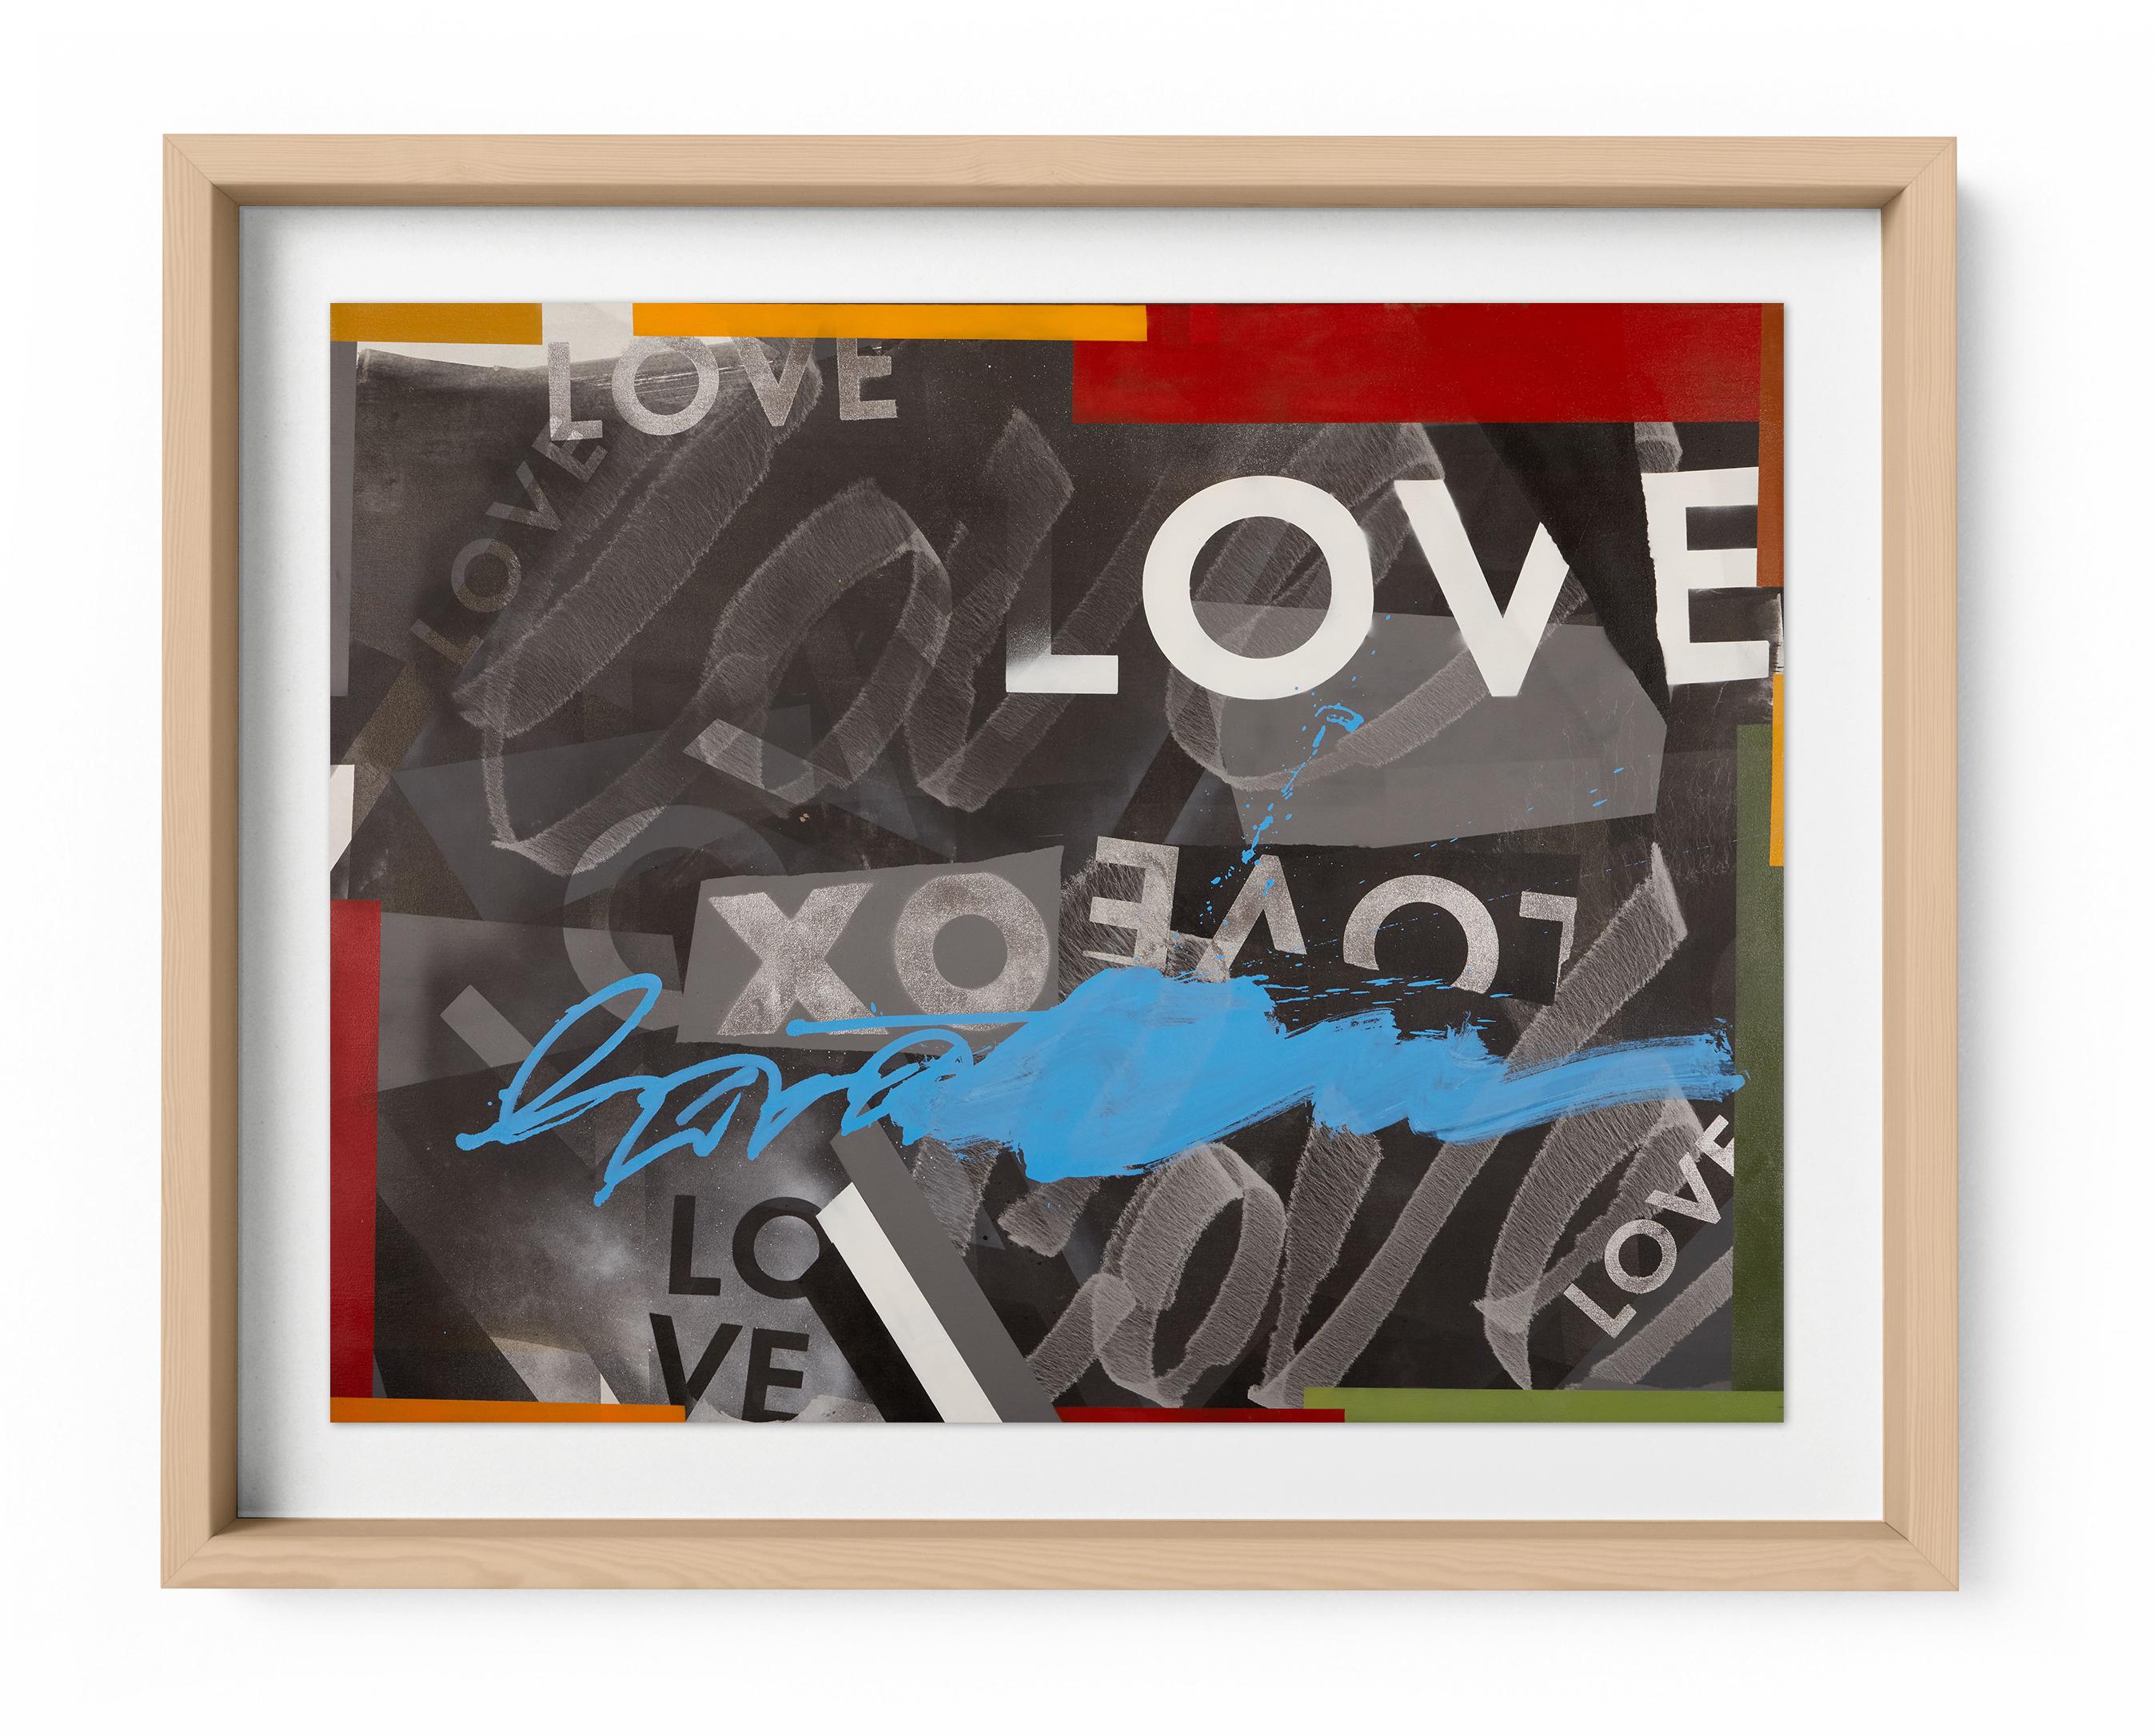 Get Love is a framed signed limited edition contemporary print by iconic Los Angeles-based visual artist and one of LA's original Graffiti artists Karlos Marquez. It features vibrant colors and abstract street art on high quality fine art paper.  